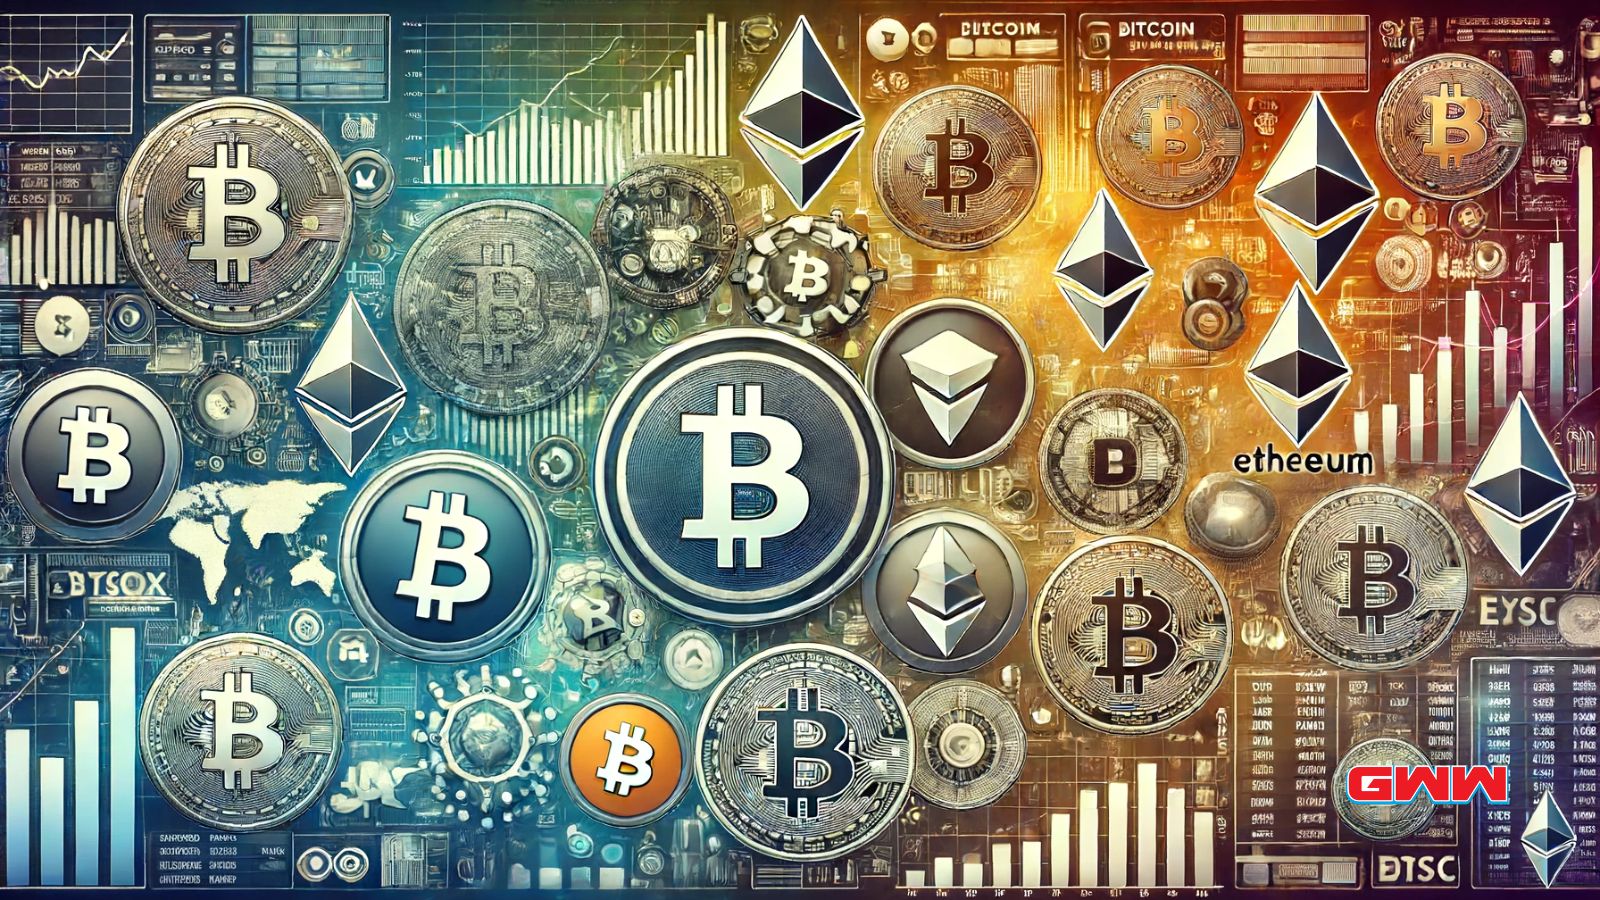 Top 10 crypto exchange platforms with various cryptocurrency symbols